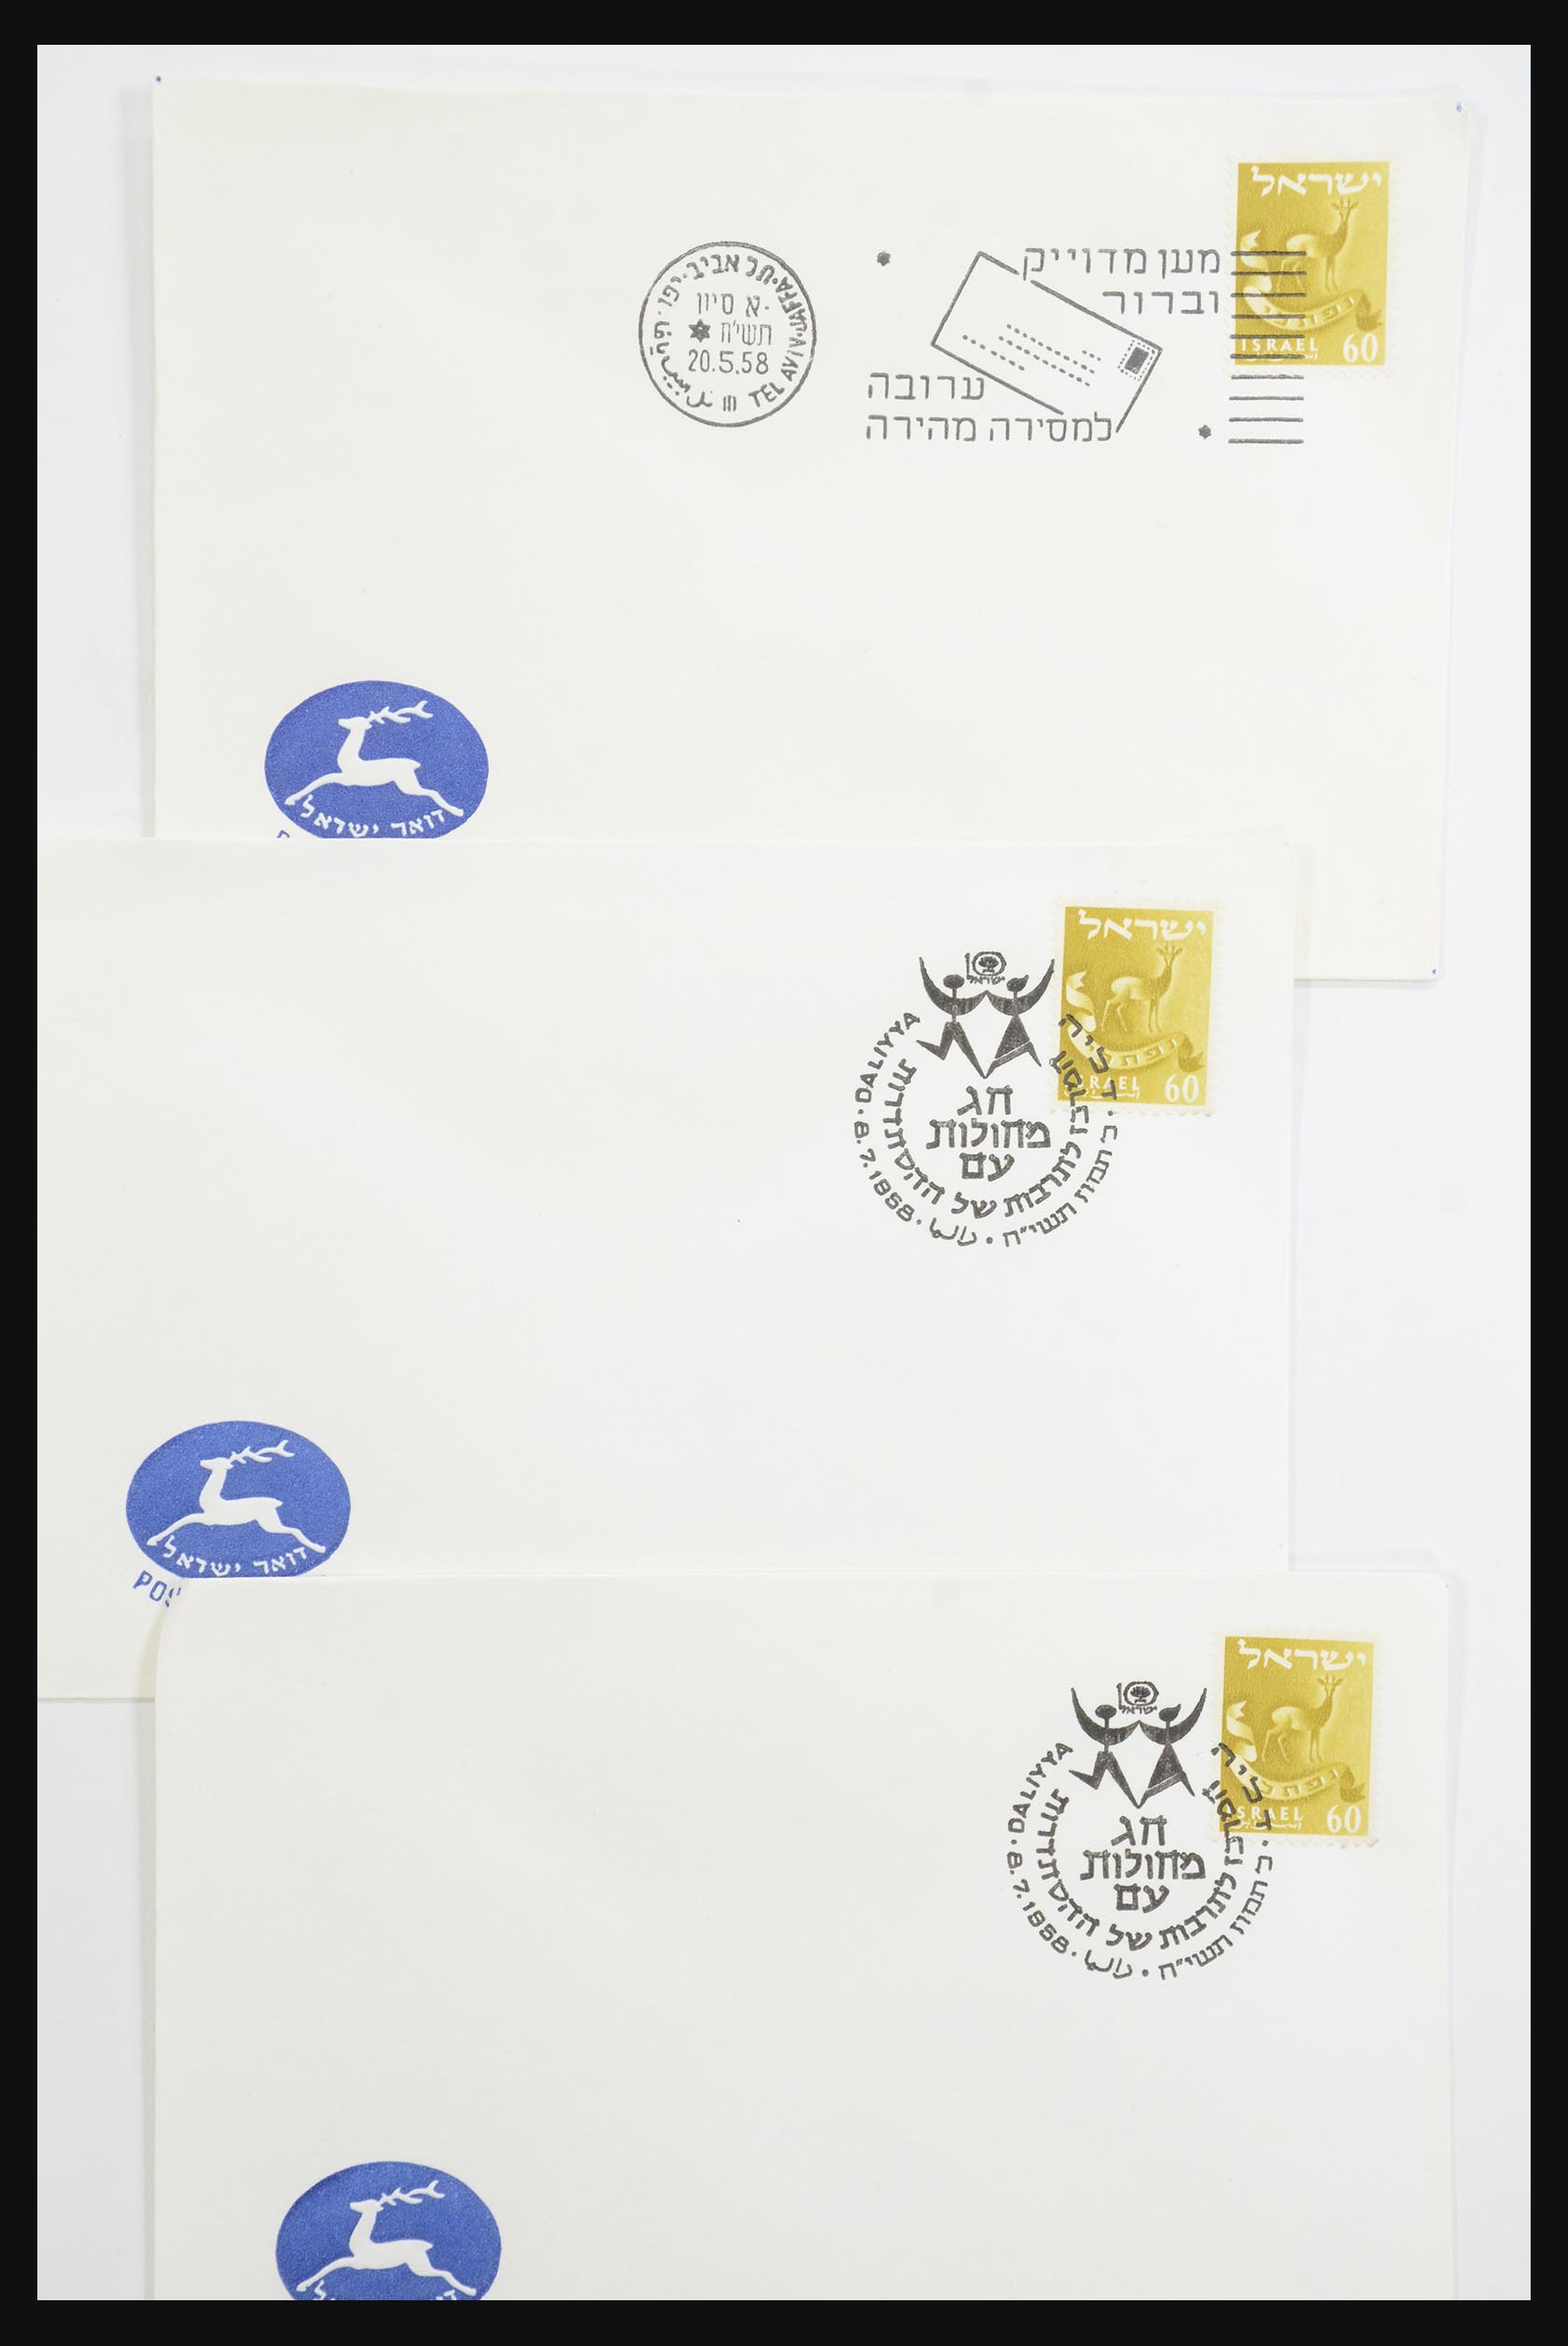 31924 077 - 31924 Israel first day cover collection 1957-2003.